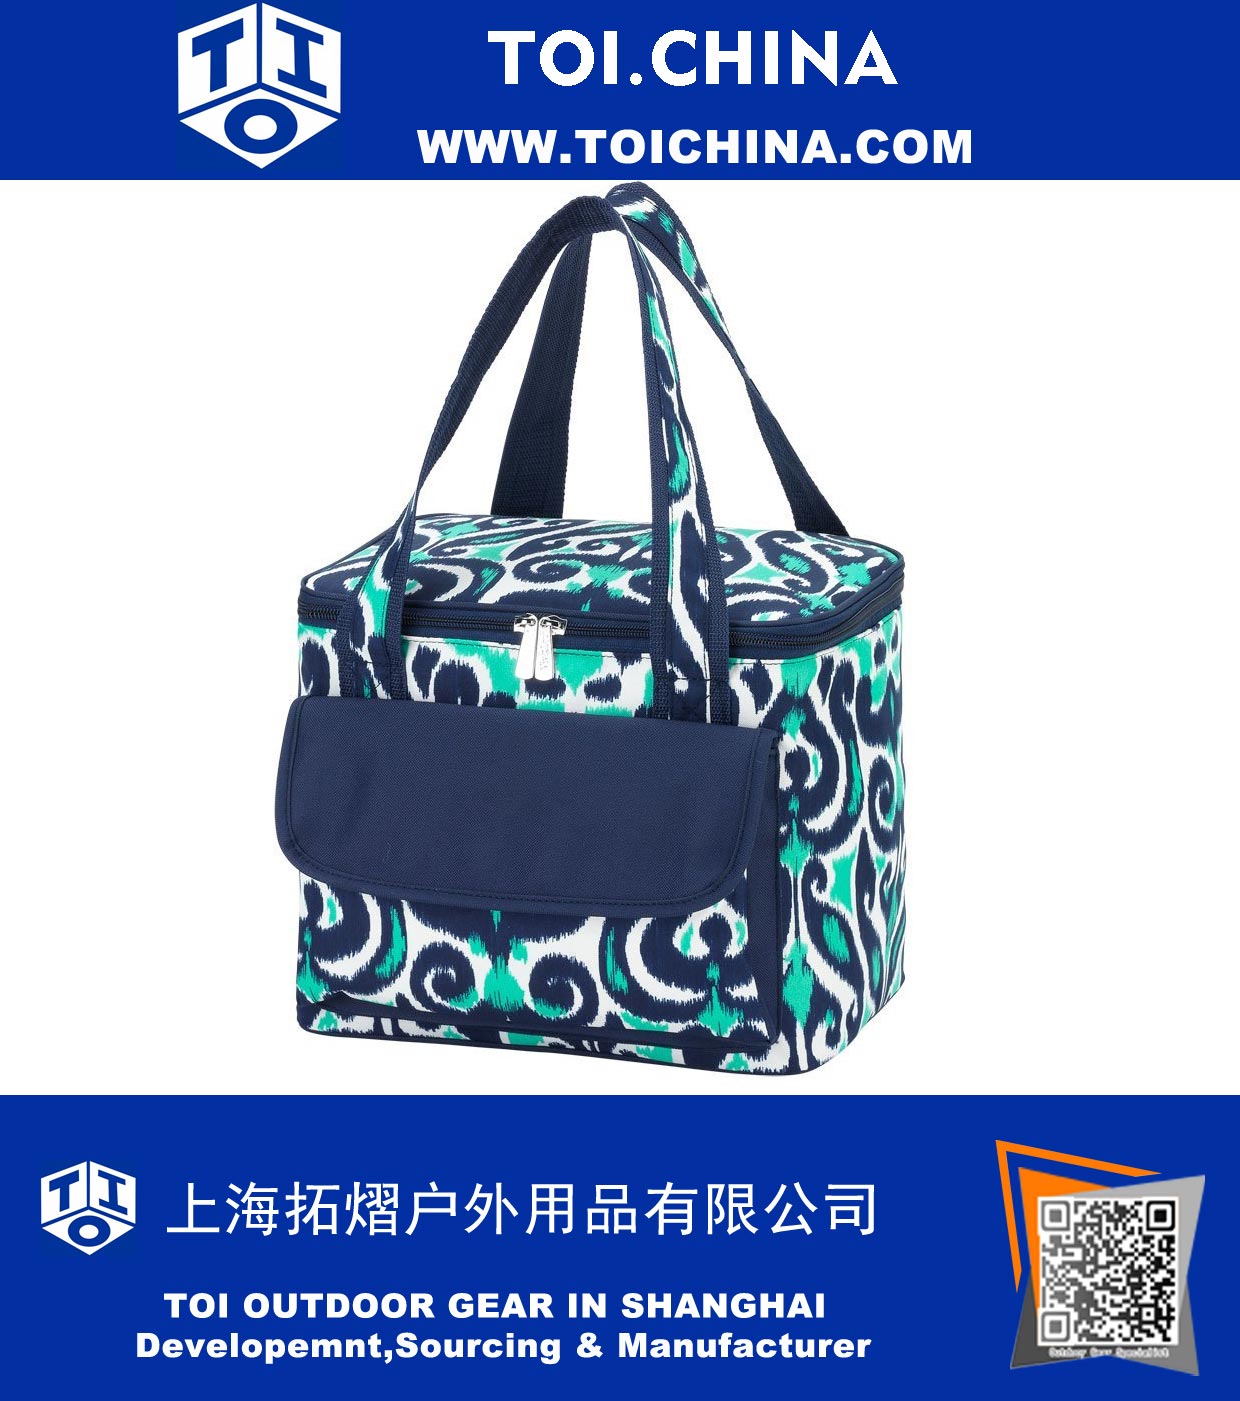 High Fashion Print Collapsible Soft Cooler Bag Tote